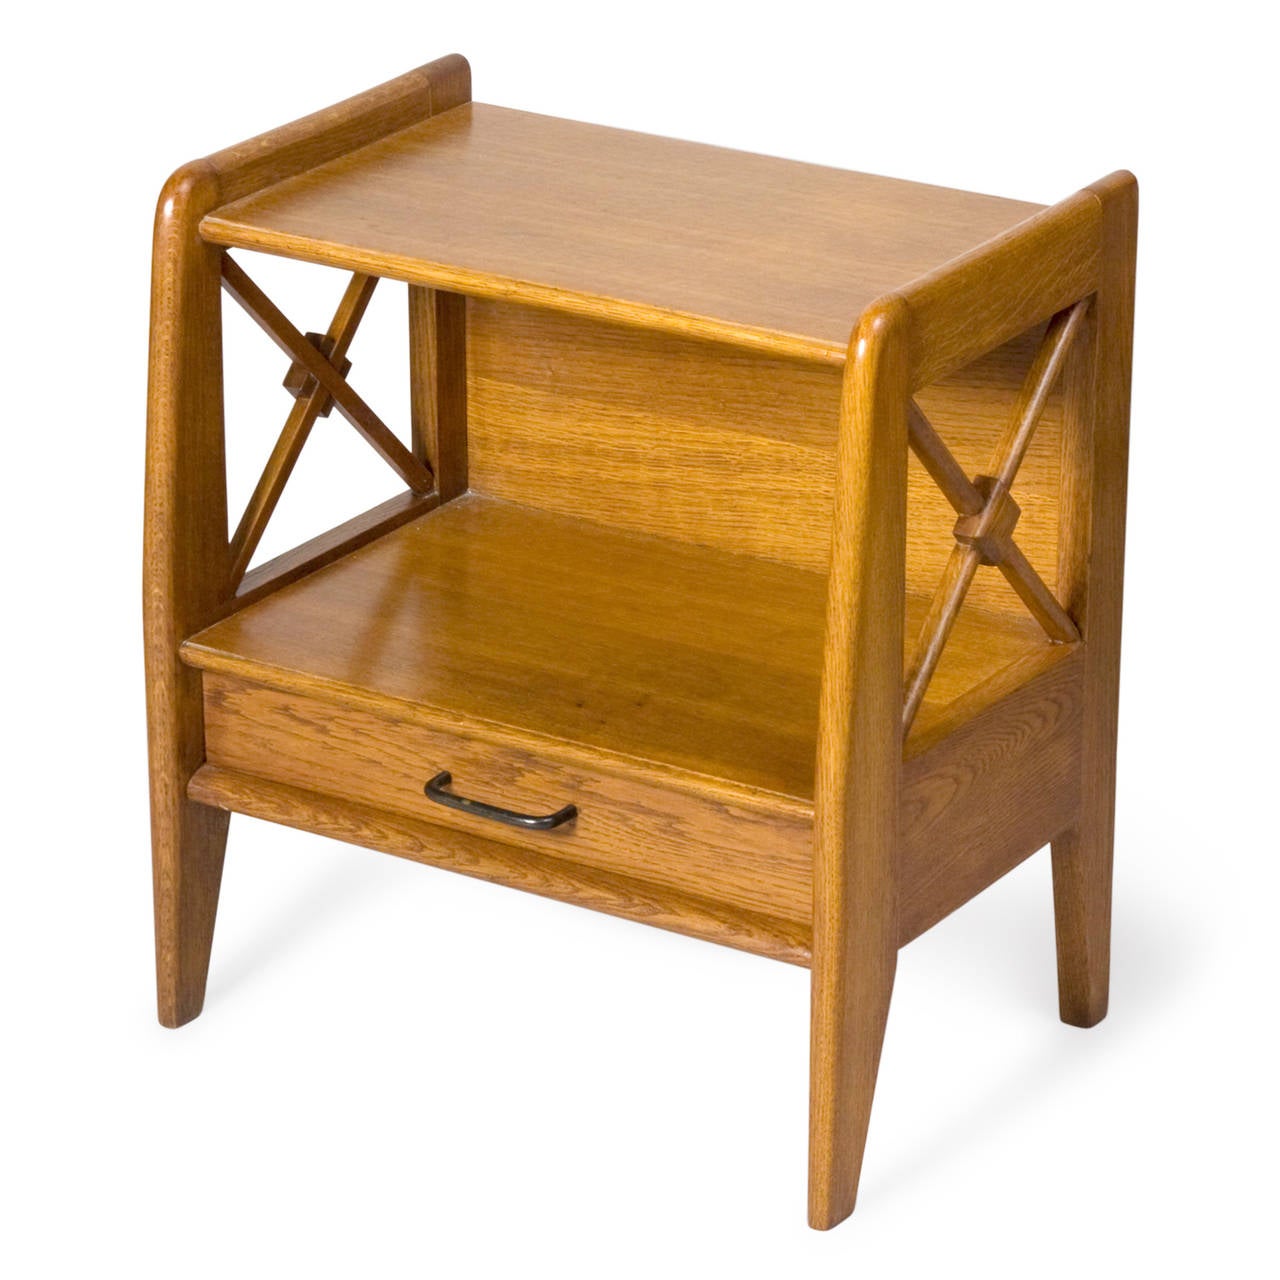 Pair of single-drawer oak end tables, croisillon sides with lower drawer forming shelf, gently tapering legs, in style of Jacques Adnet, French, 1950s. Height 21 1/2 in, top surface height 20 1/2 in, lower shelf height 10 in, width 19 1/2 in, depth